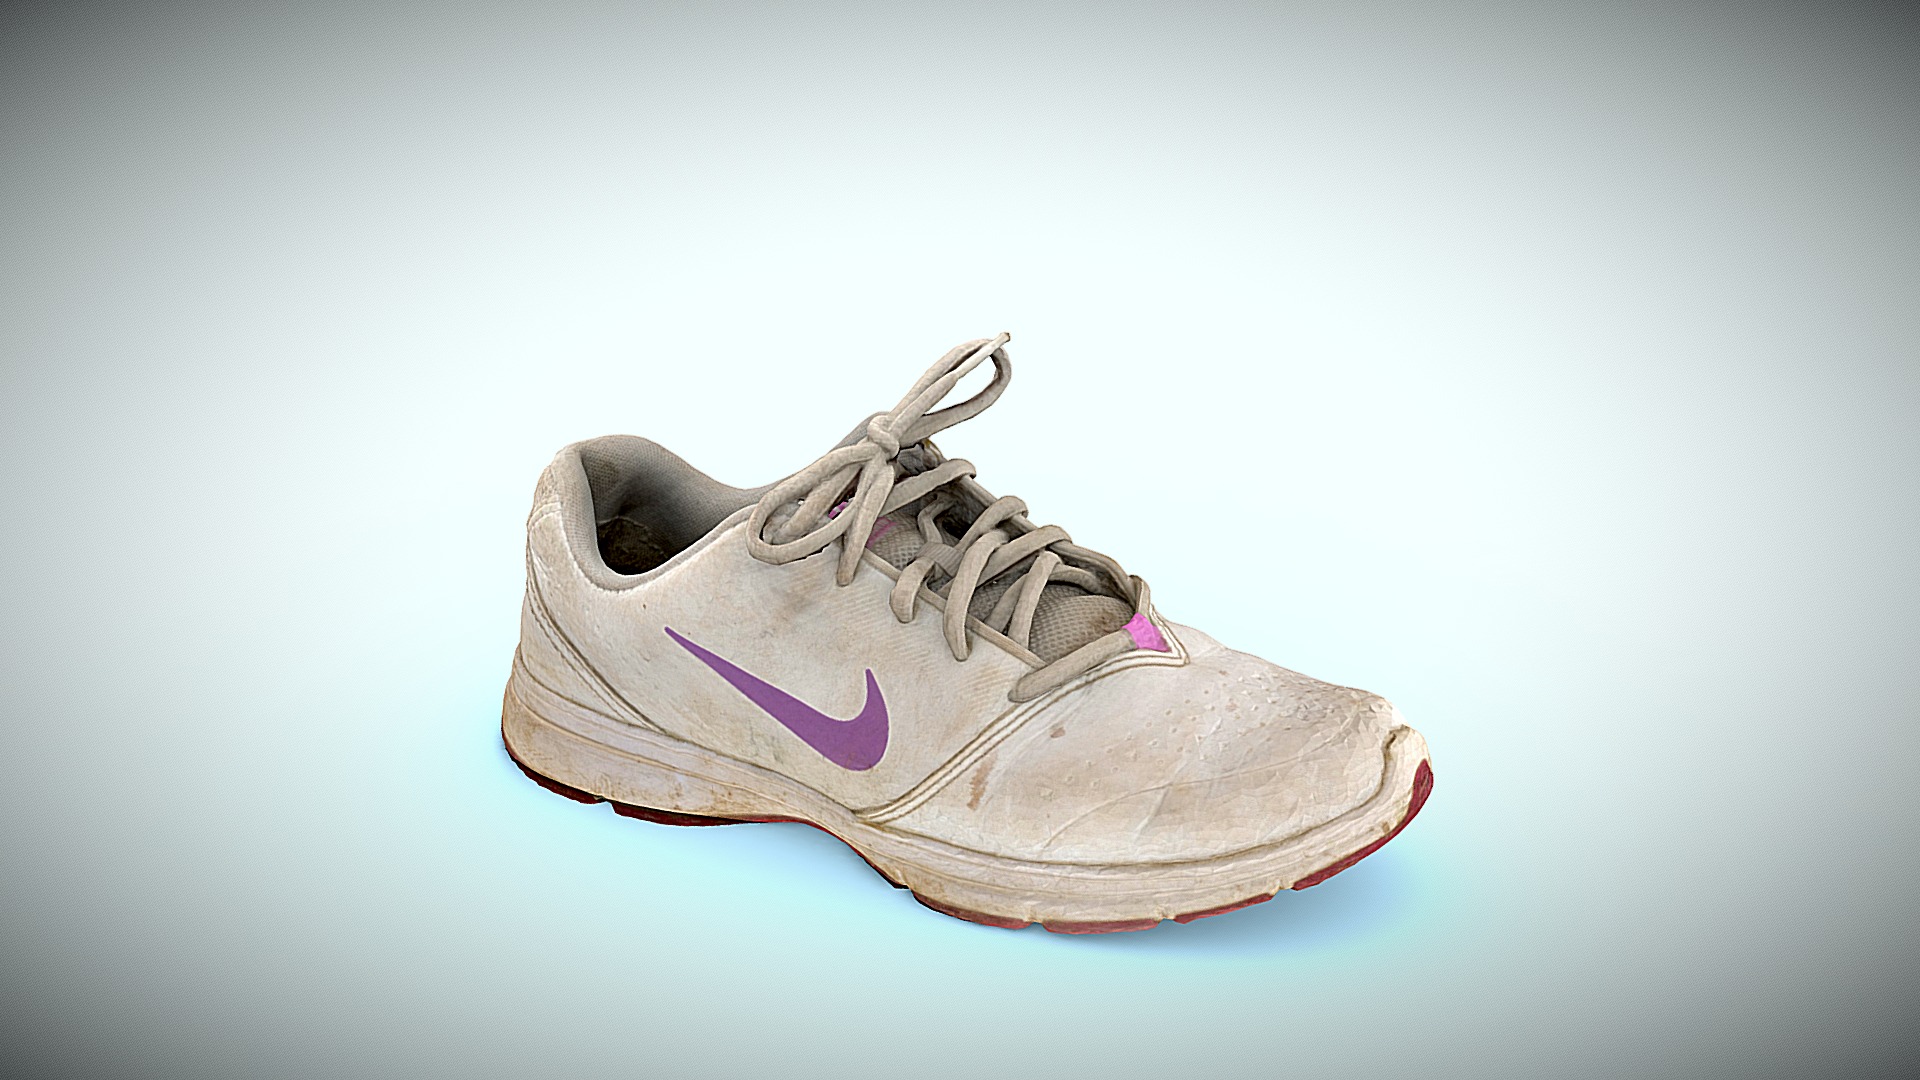 3D model Sneaker Nike - This is a 3D model of the Sneaker Nike. The 3D model is about a close-up of a shoe.